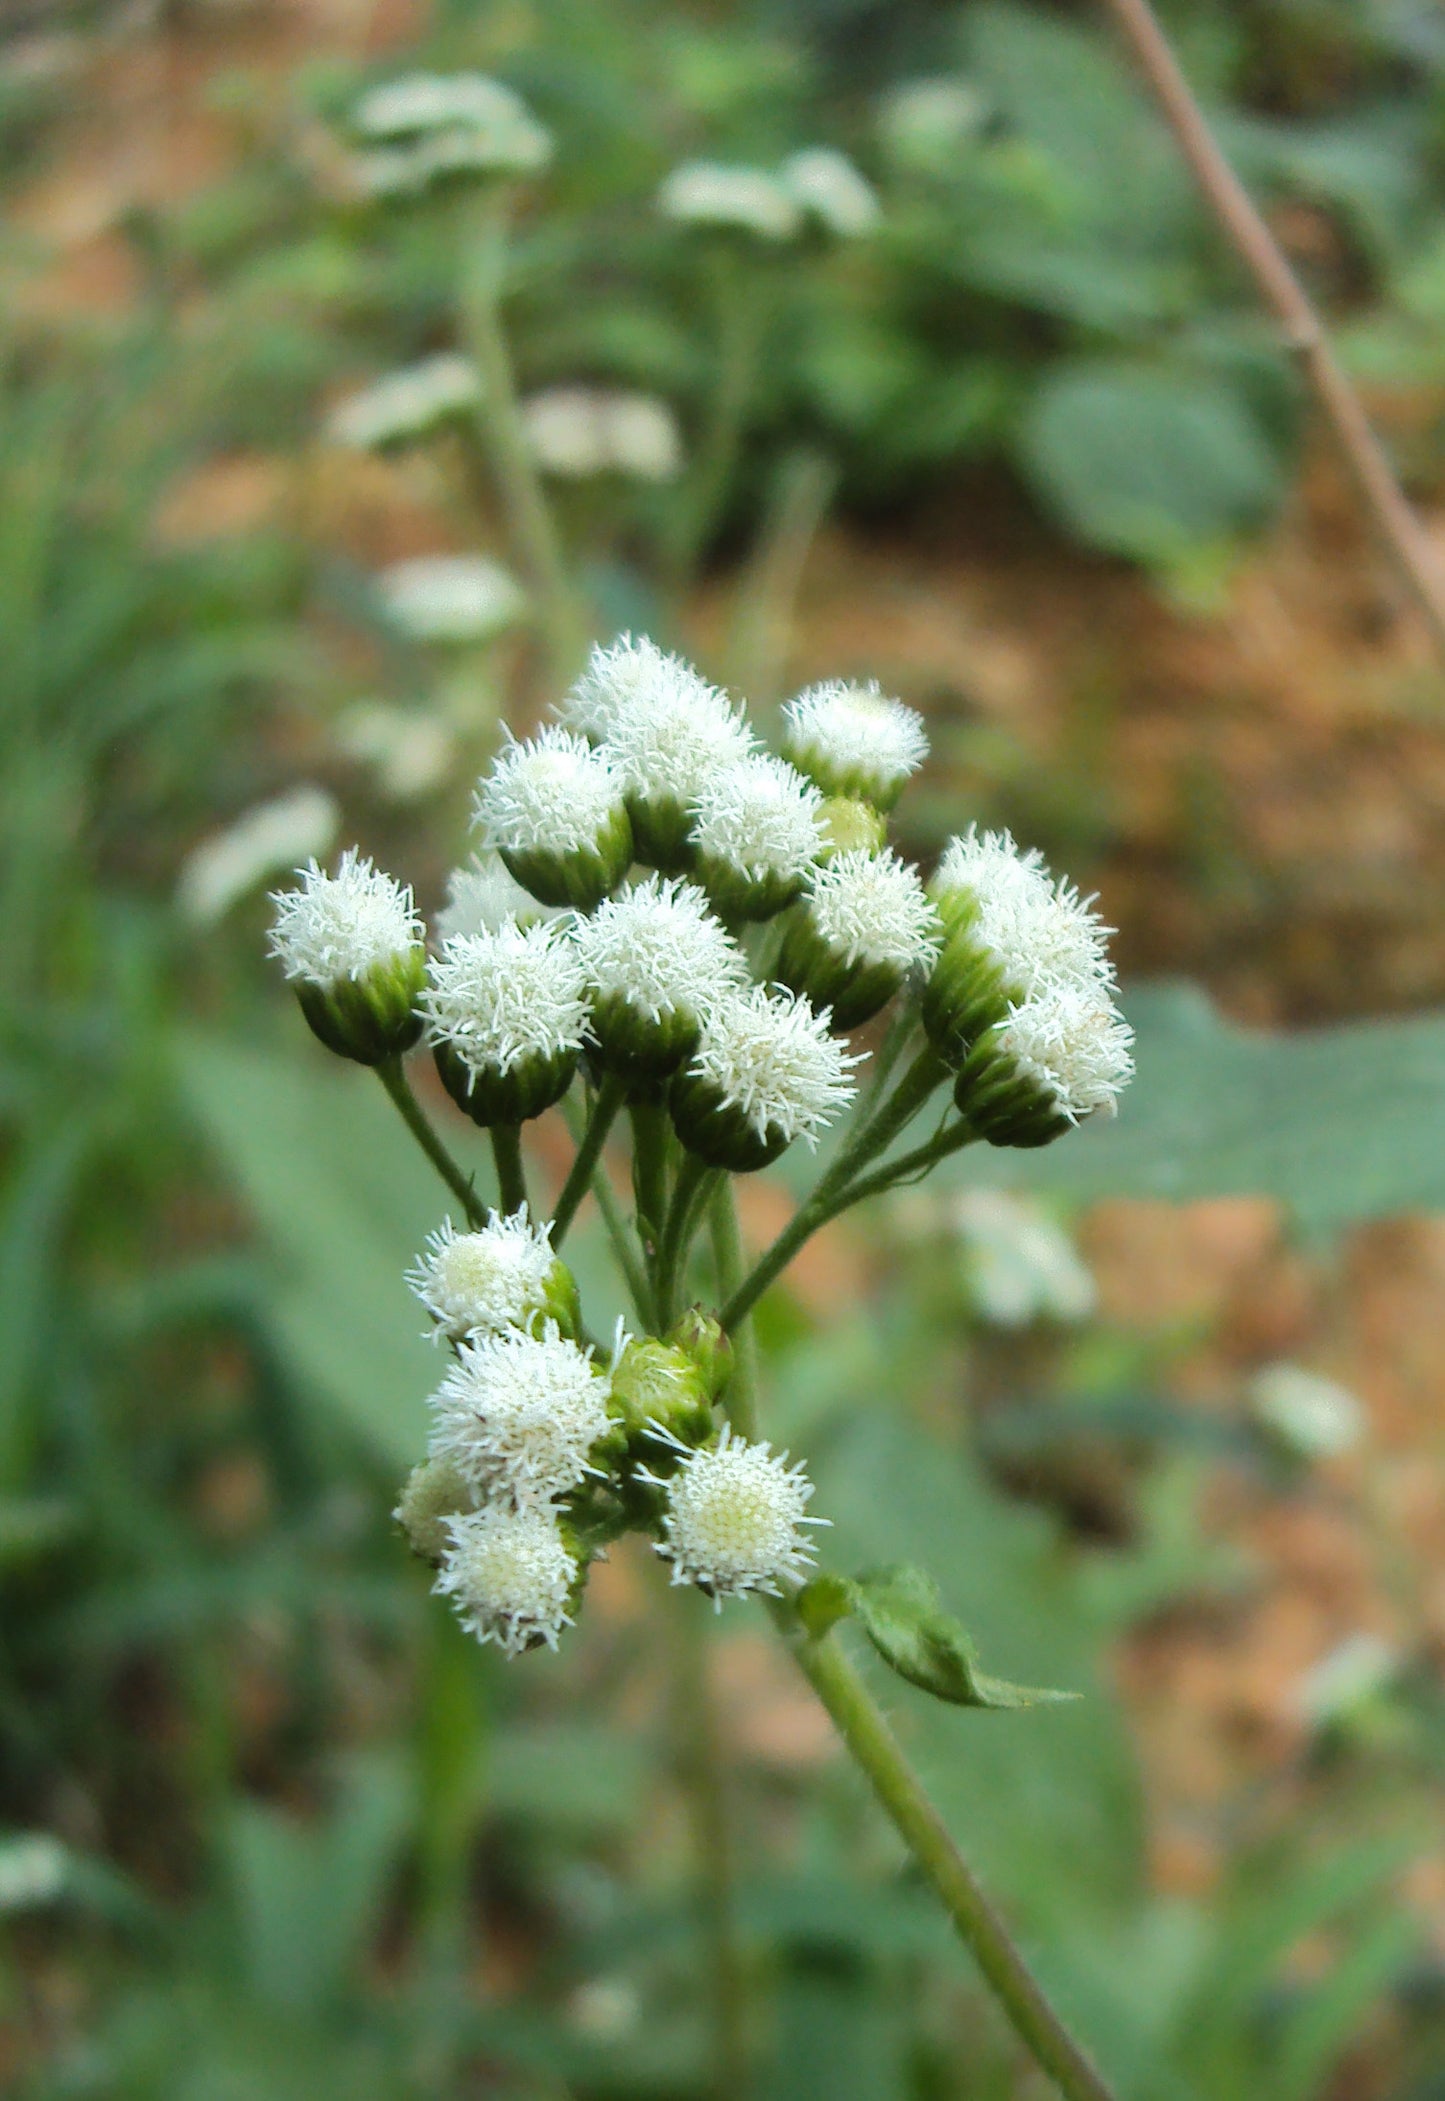 Tropical Whiteweed (Ageratum conyzoide)